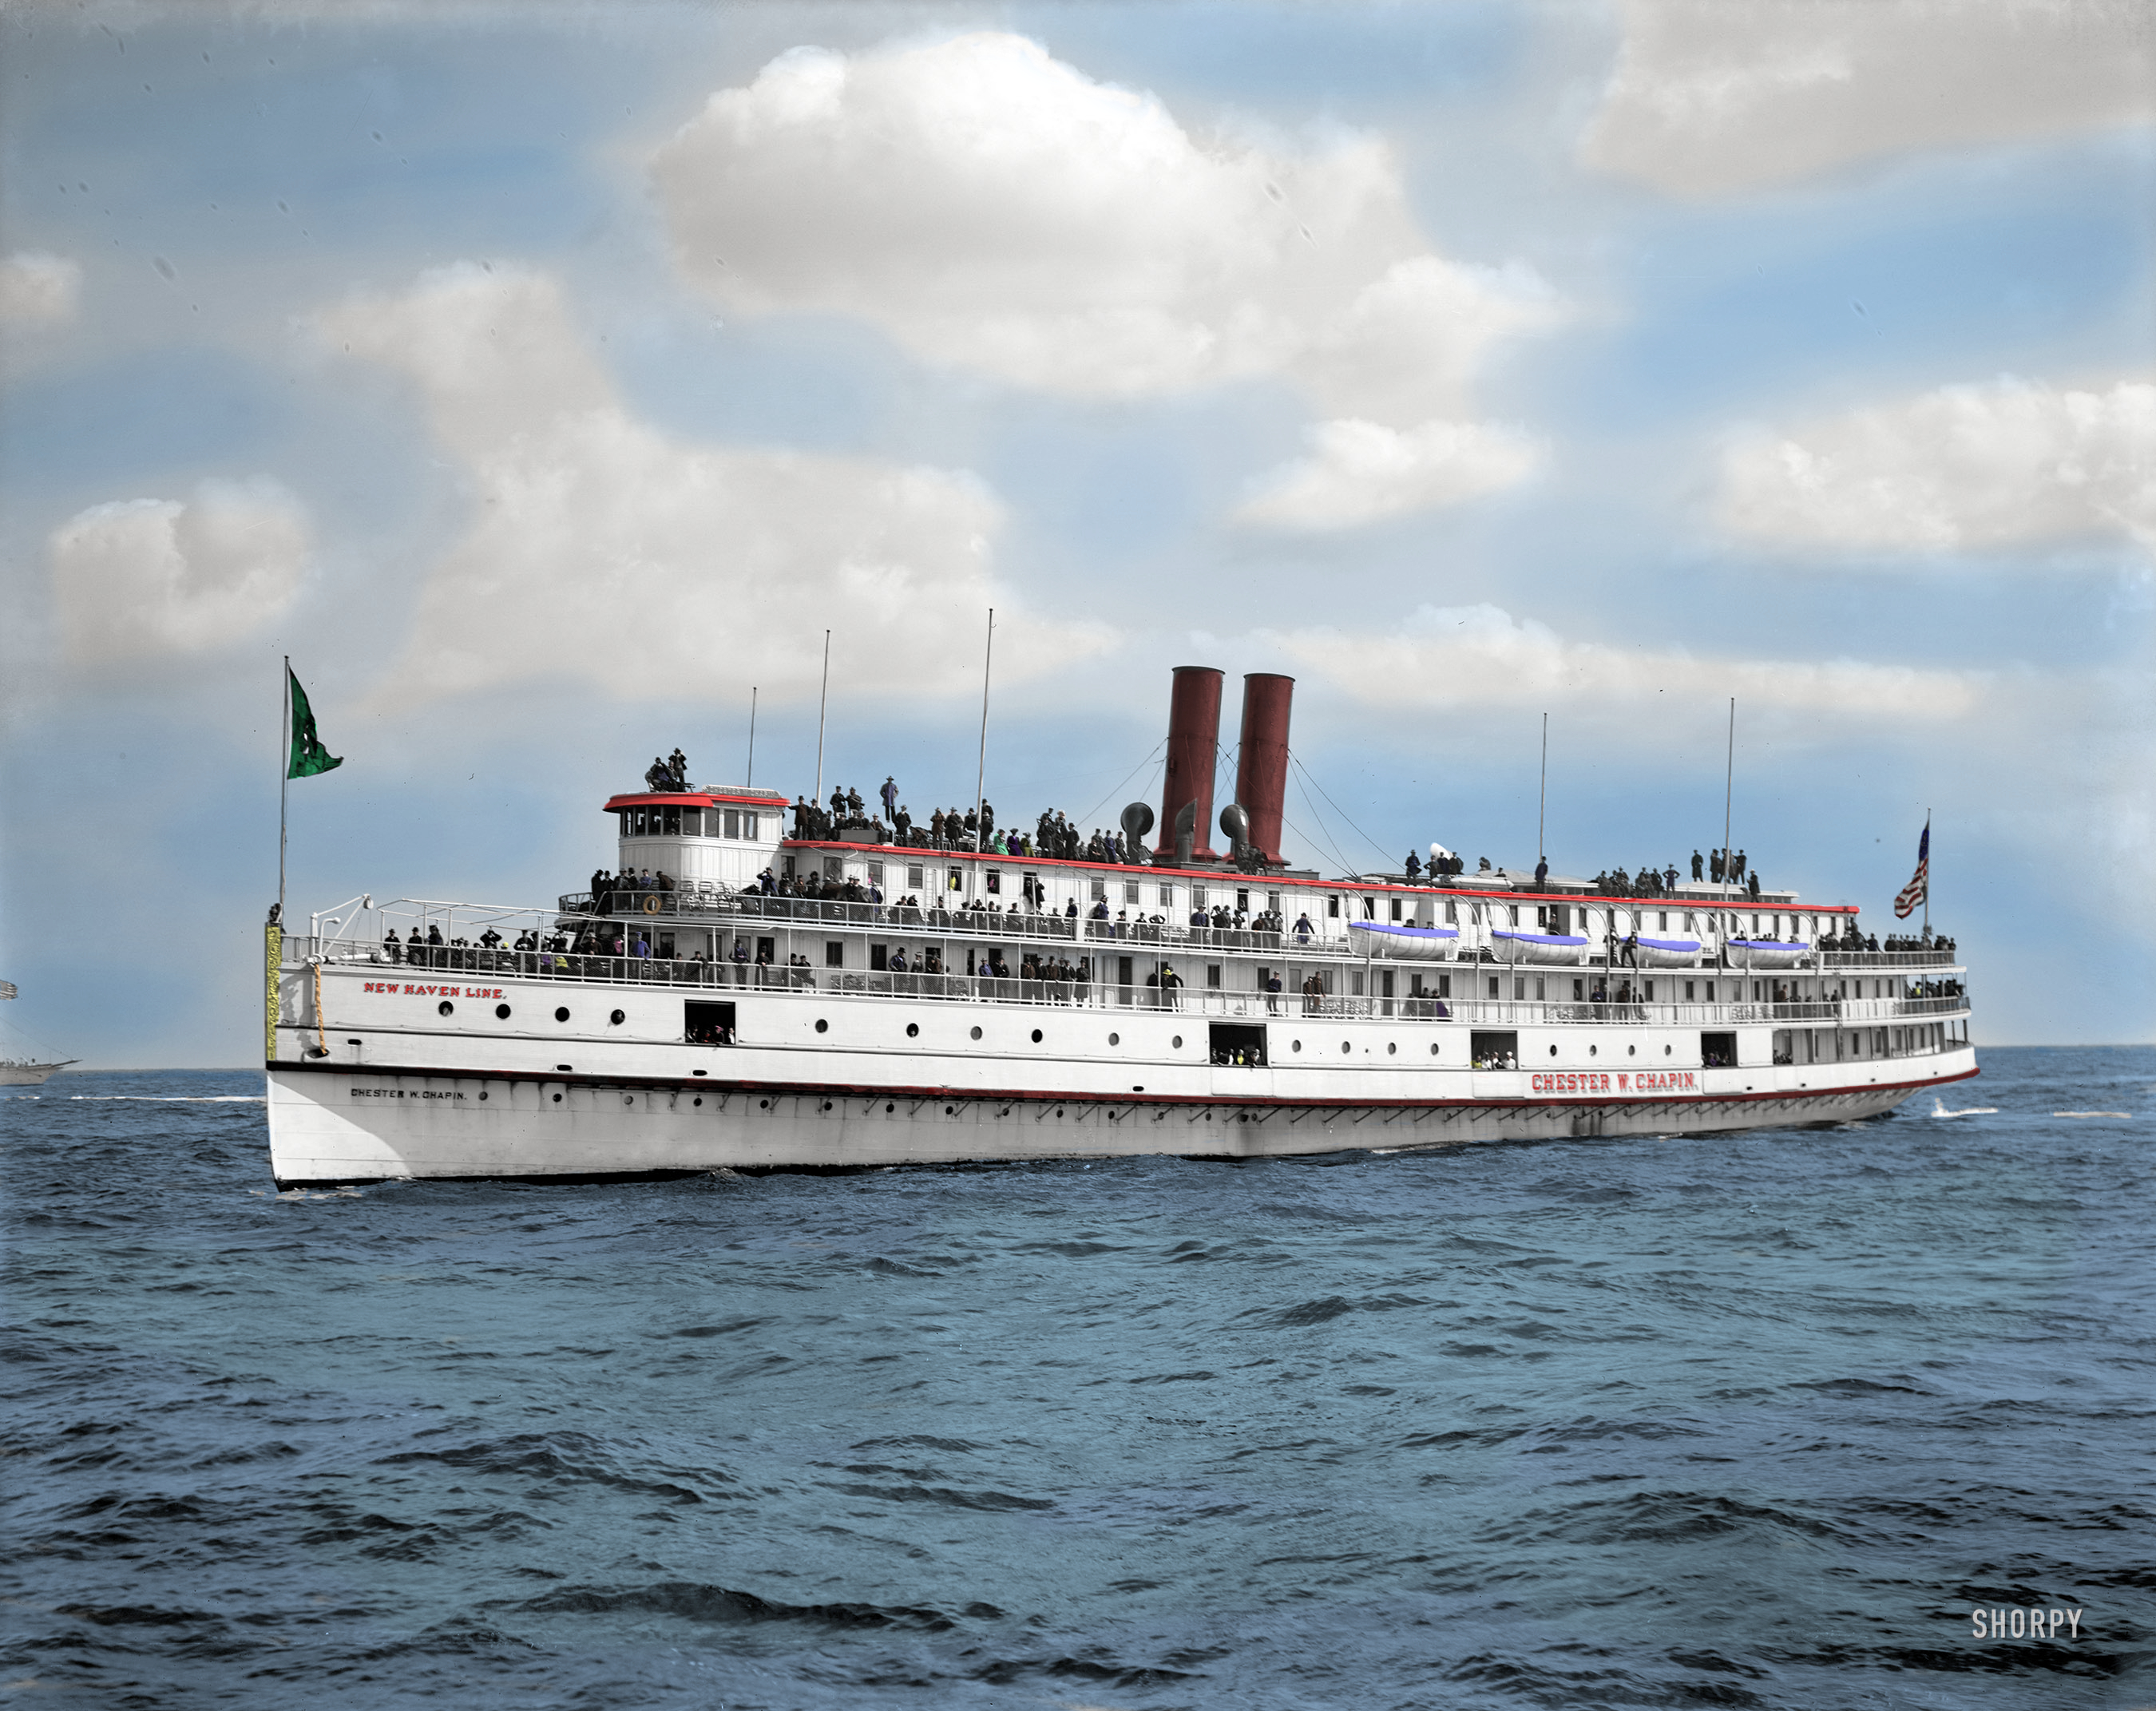 New York, America's cup race 1901. I enjoyed colorizing this pic, for that matter all my pics. Shorpy does a fantasic job in bringing the past to us, thank you so much. View full size.